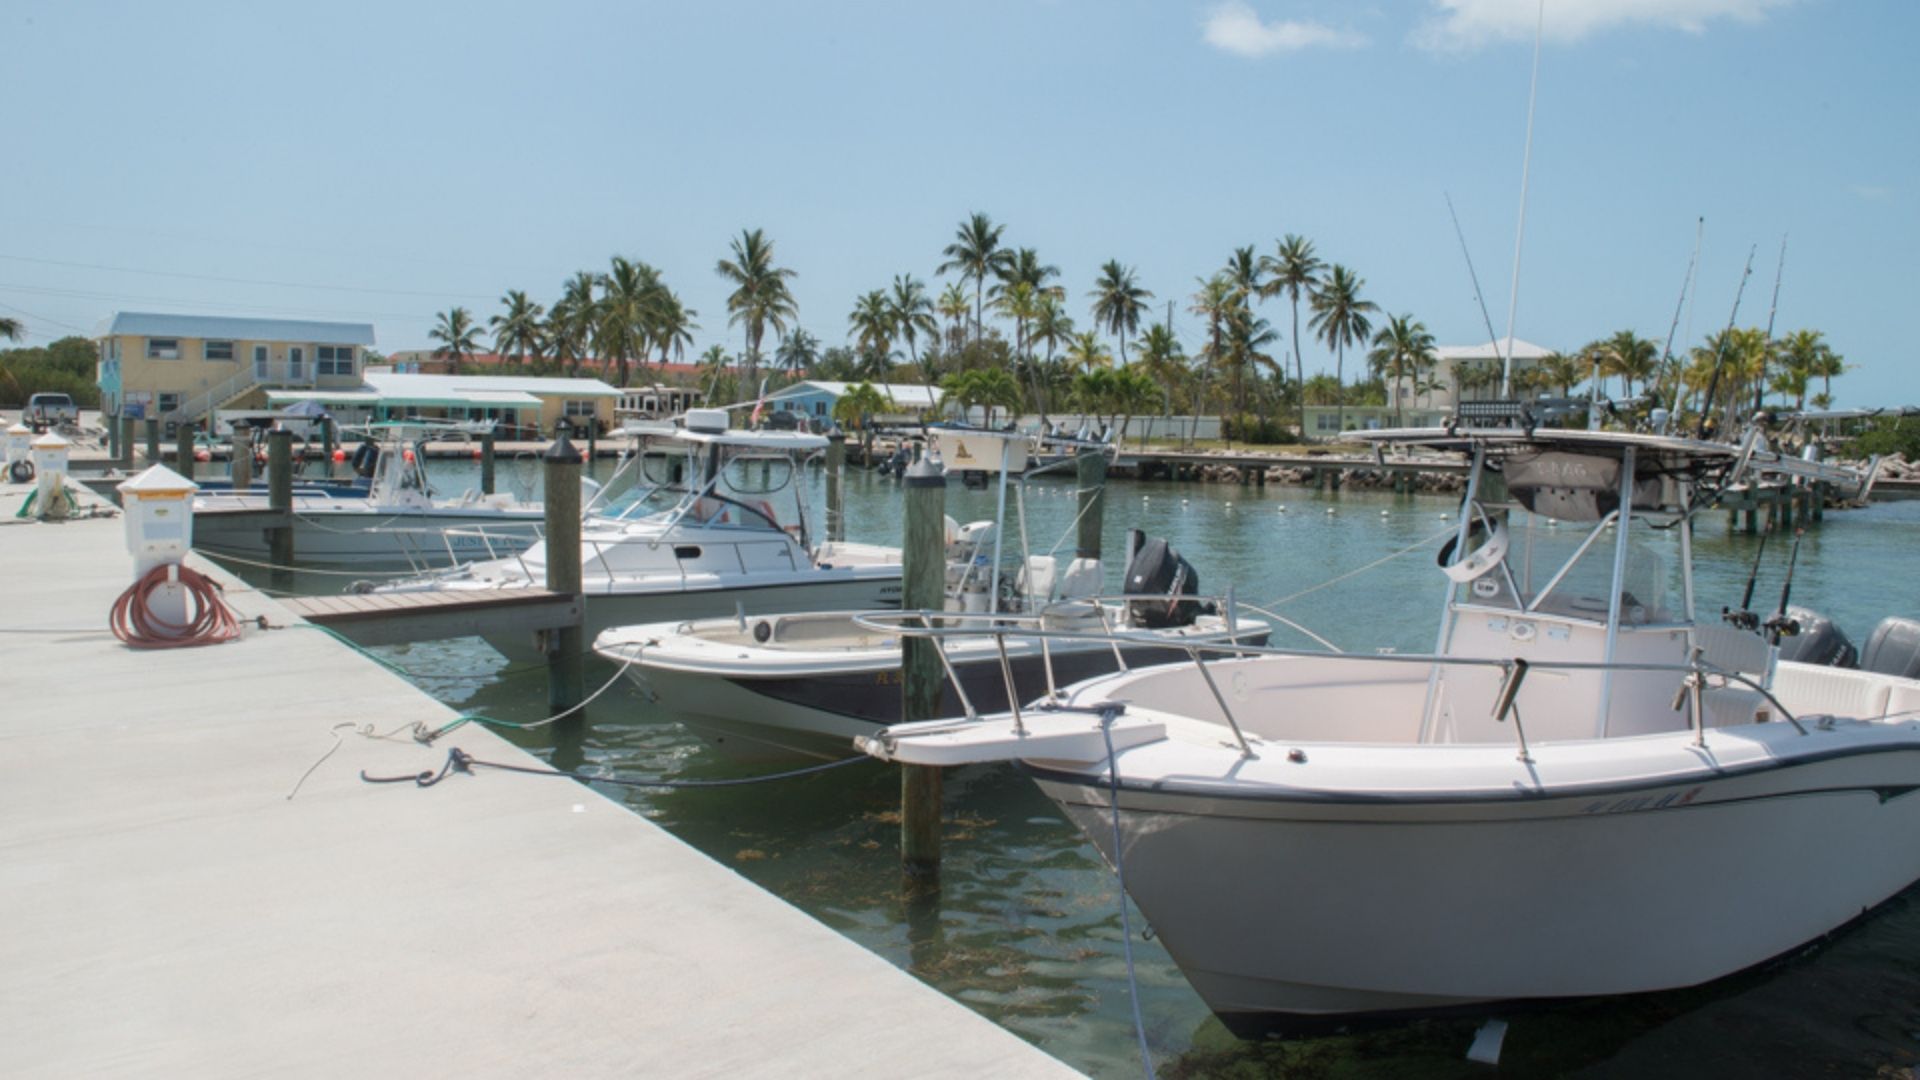 Boat Slip vs. Dock: What Are the Differences?